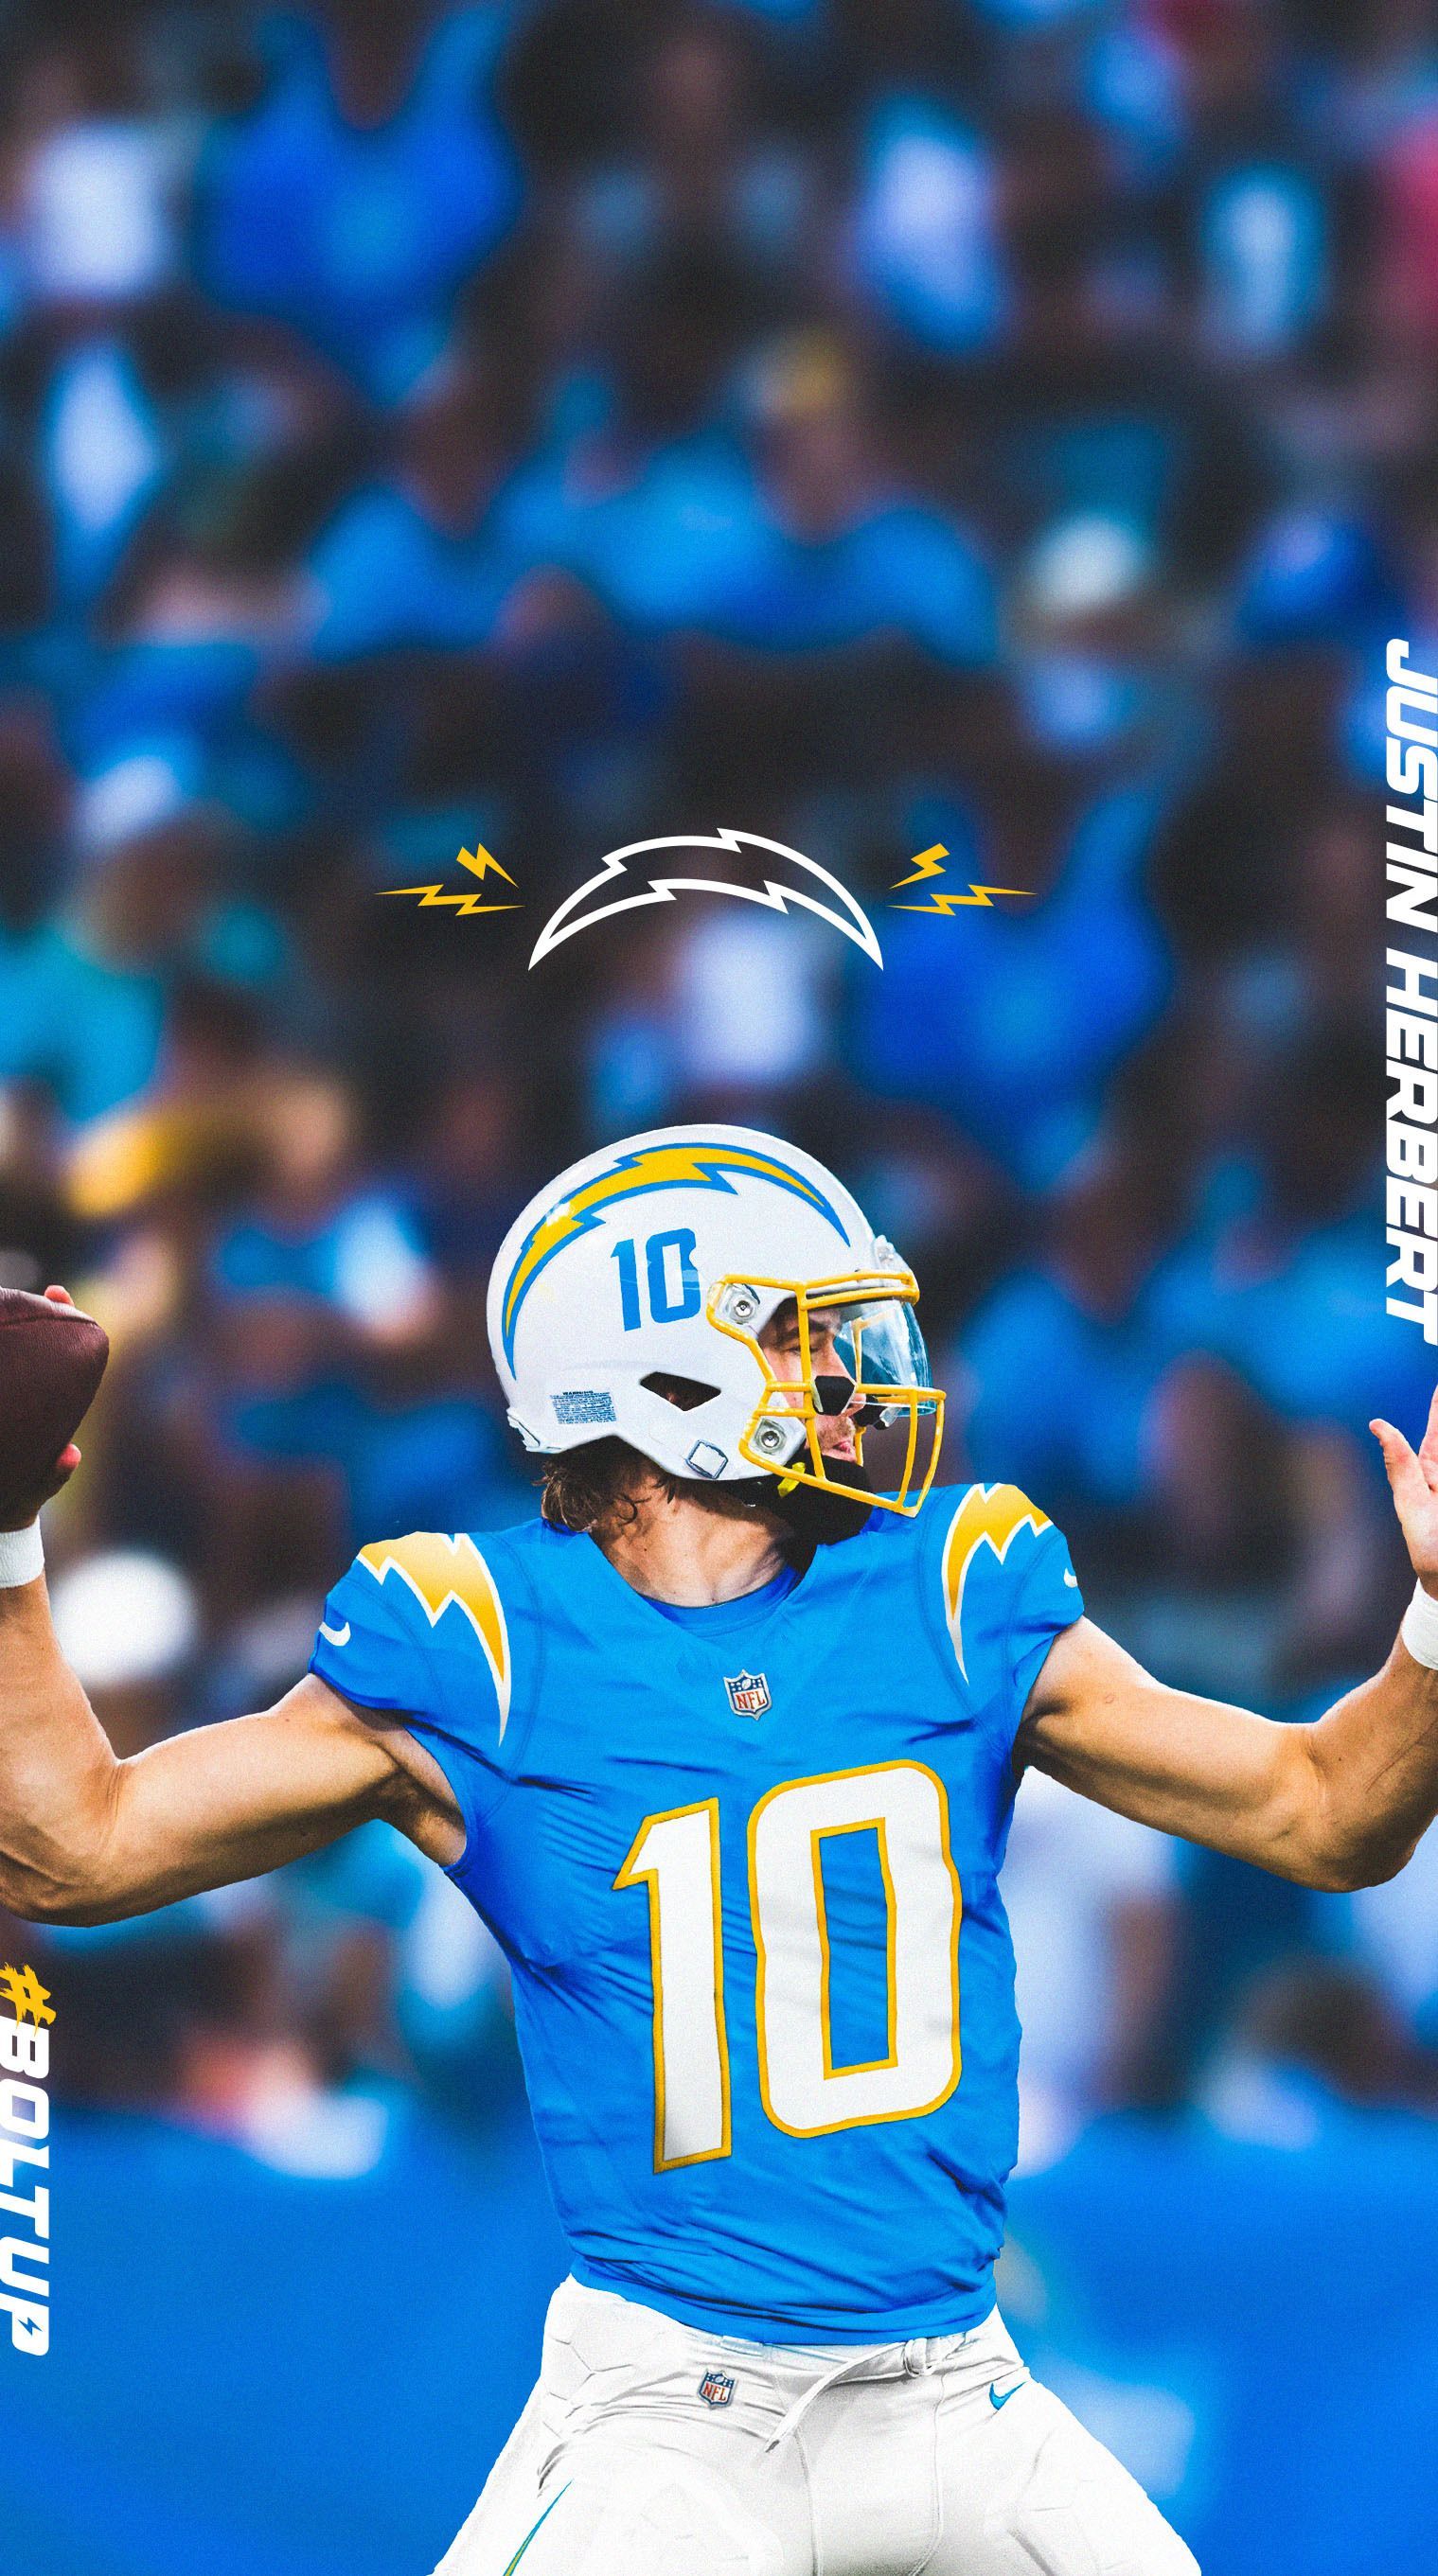 Chargers color rush HD wallpapers